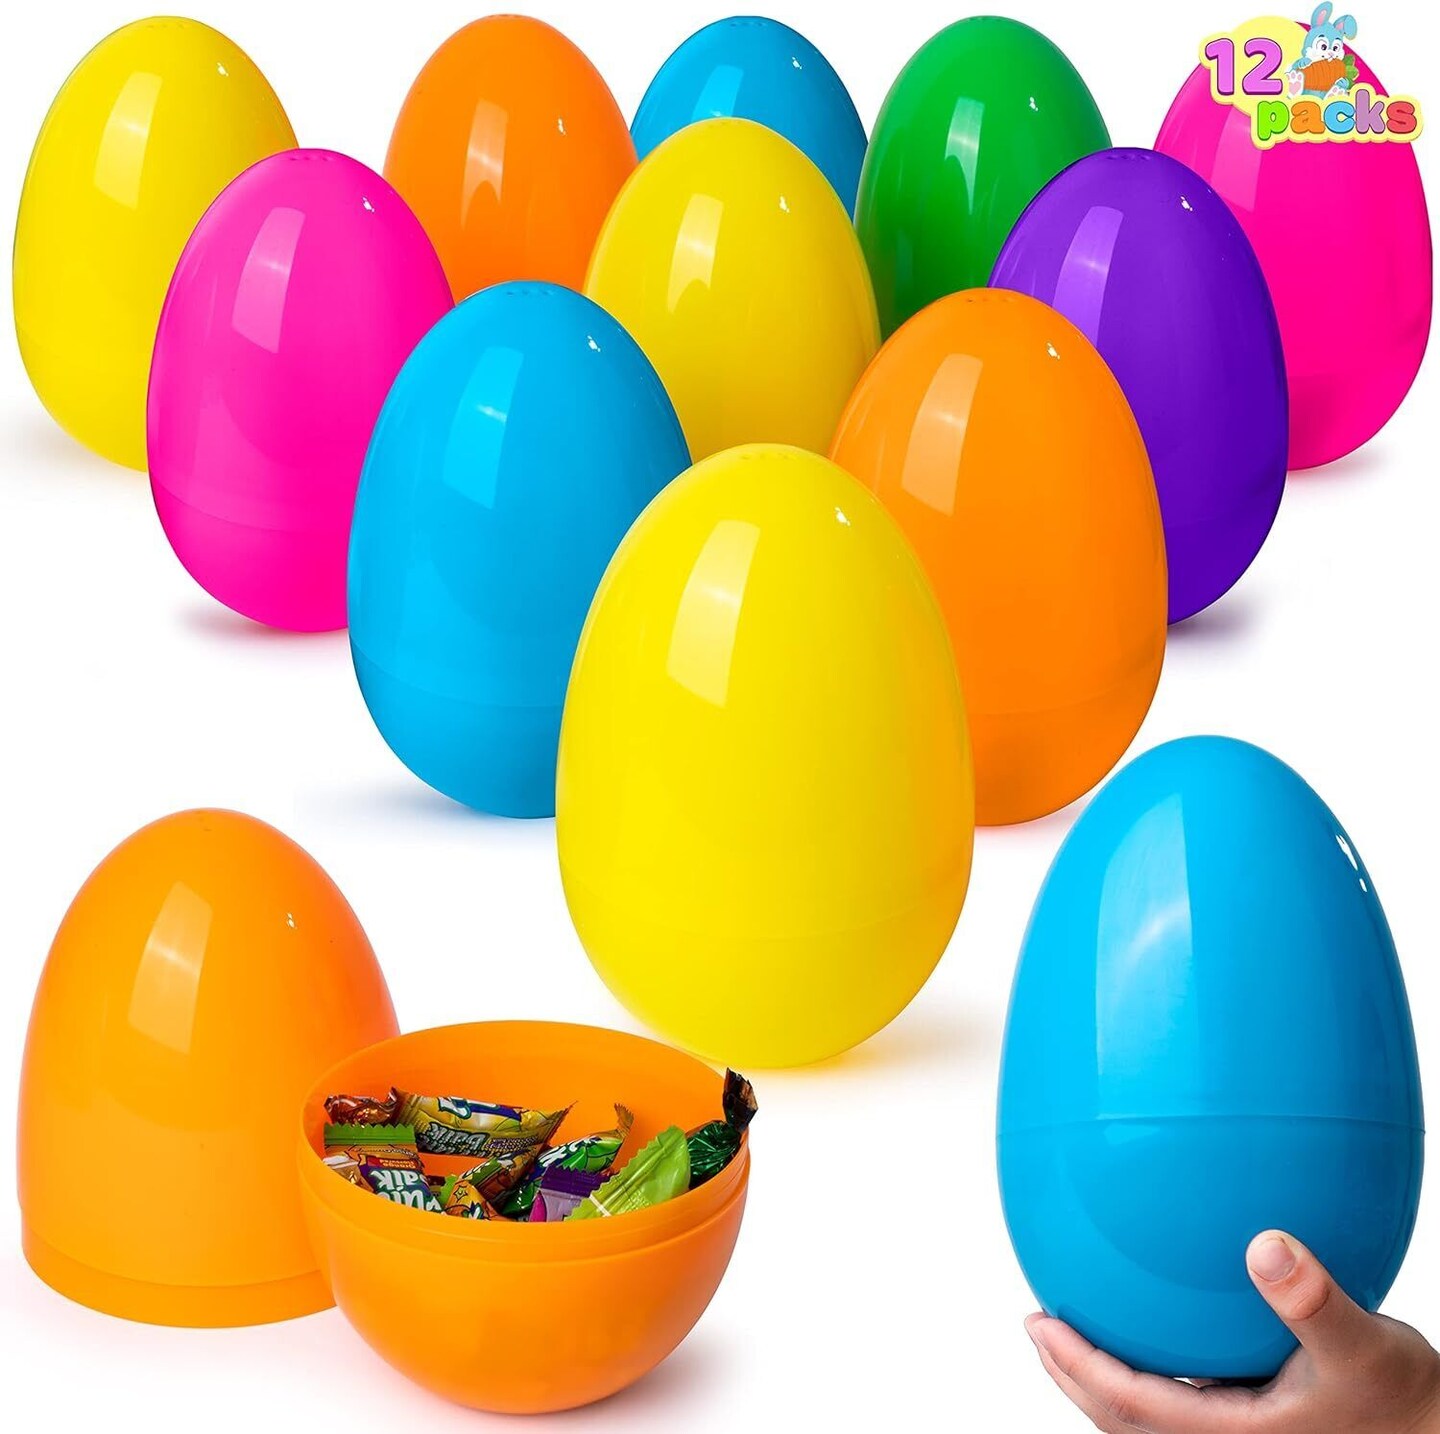 7 Inches Assorted Easter Eggs 12 pcs